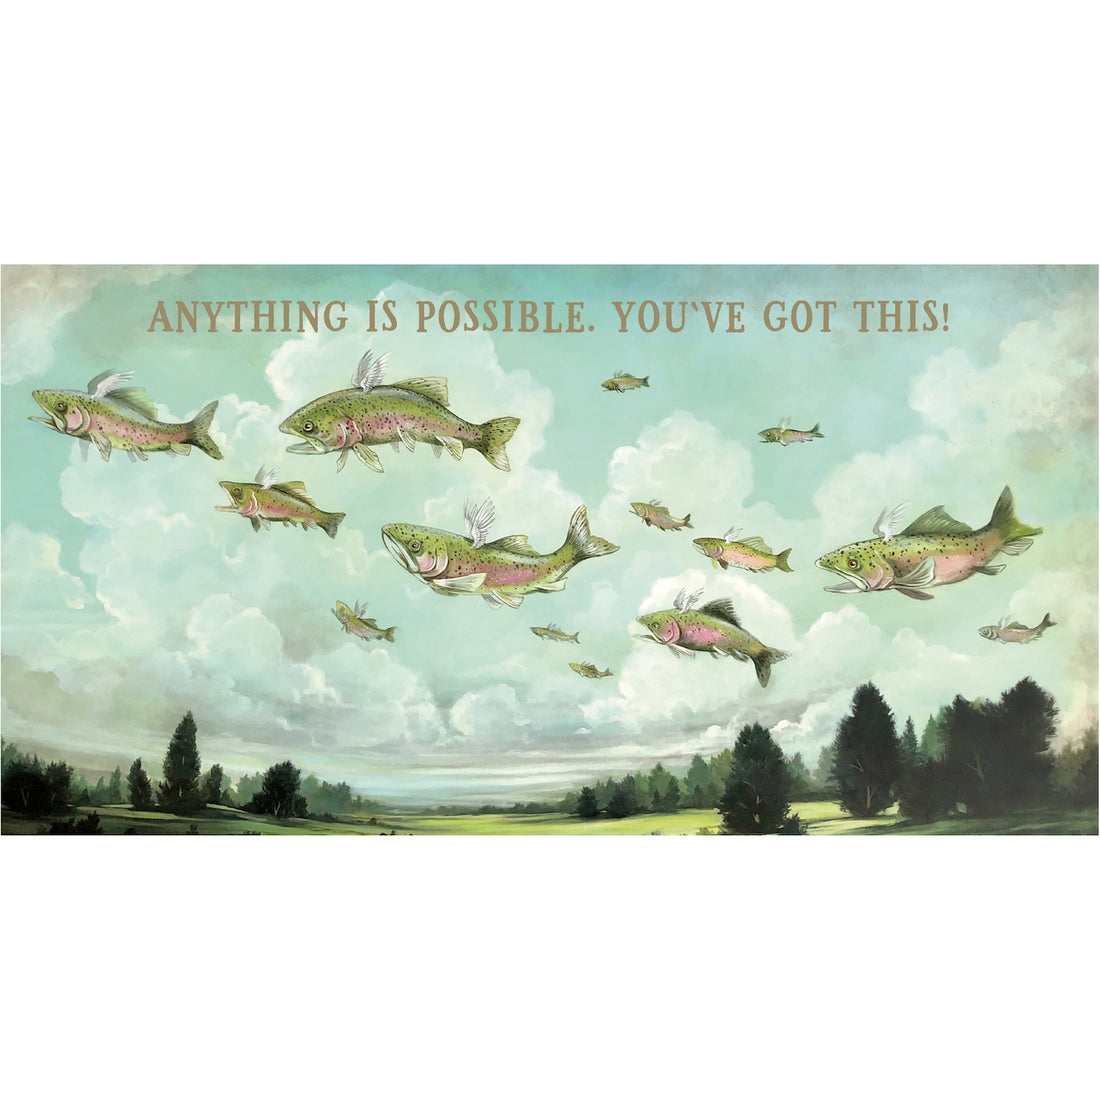 A whimsical illustration of a school of trout with small white wings flying through a cloudy blue sky over a green landscape.